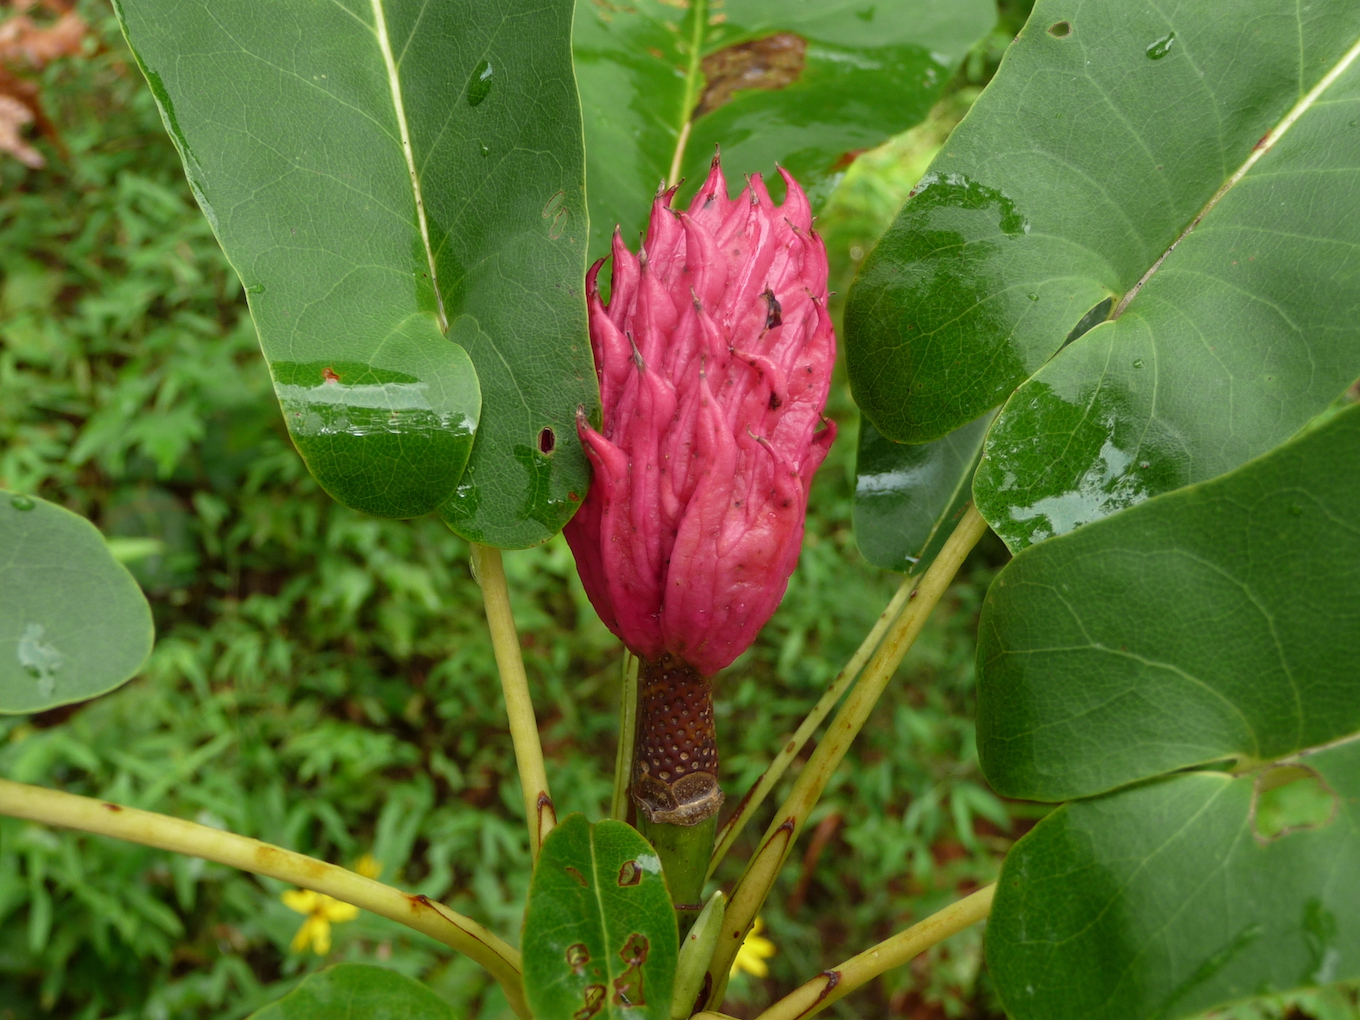 The Scientific Name is Magnolia fraseri [=Paramagnolia fraseri var. fraseri]. You will likely hear them called Fraser Magnolia, Mountain Magnolia, Fraser’s Magnolia, Earleaf Umbrella-tree, Eared Magnolia. This picture shows the The fruit is an oblong, cone-like aggregate of follicles of Magnolia fraseri [=Paramagnolia fraseri var. fraseri]